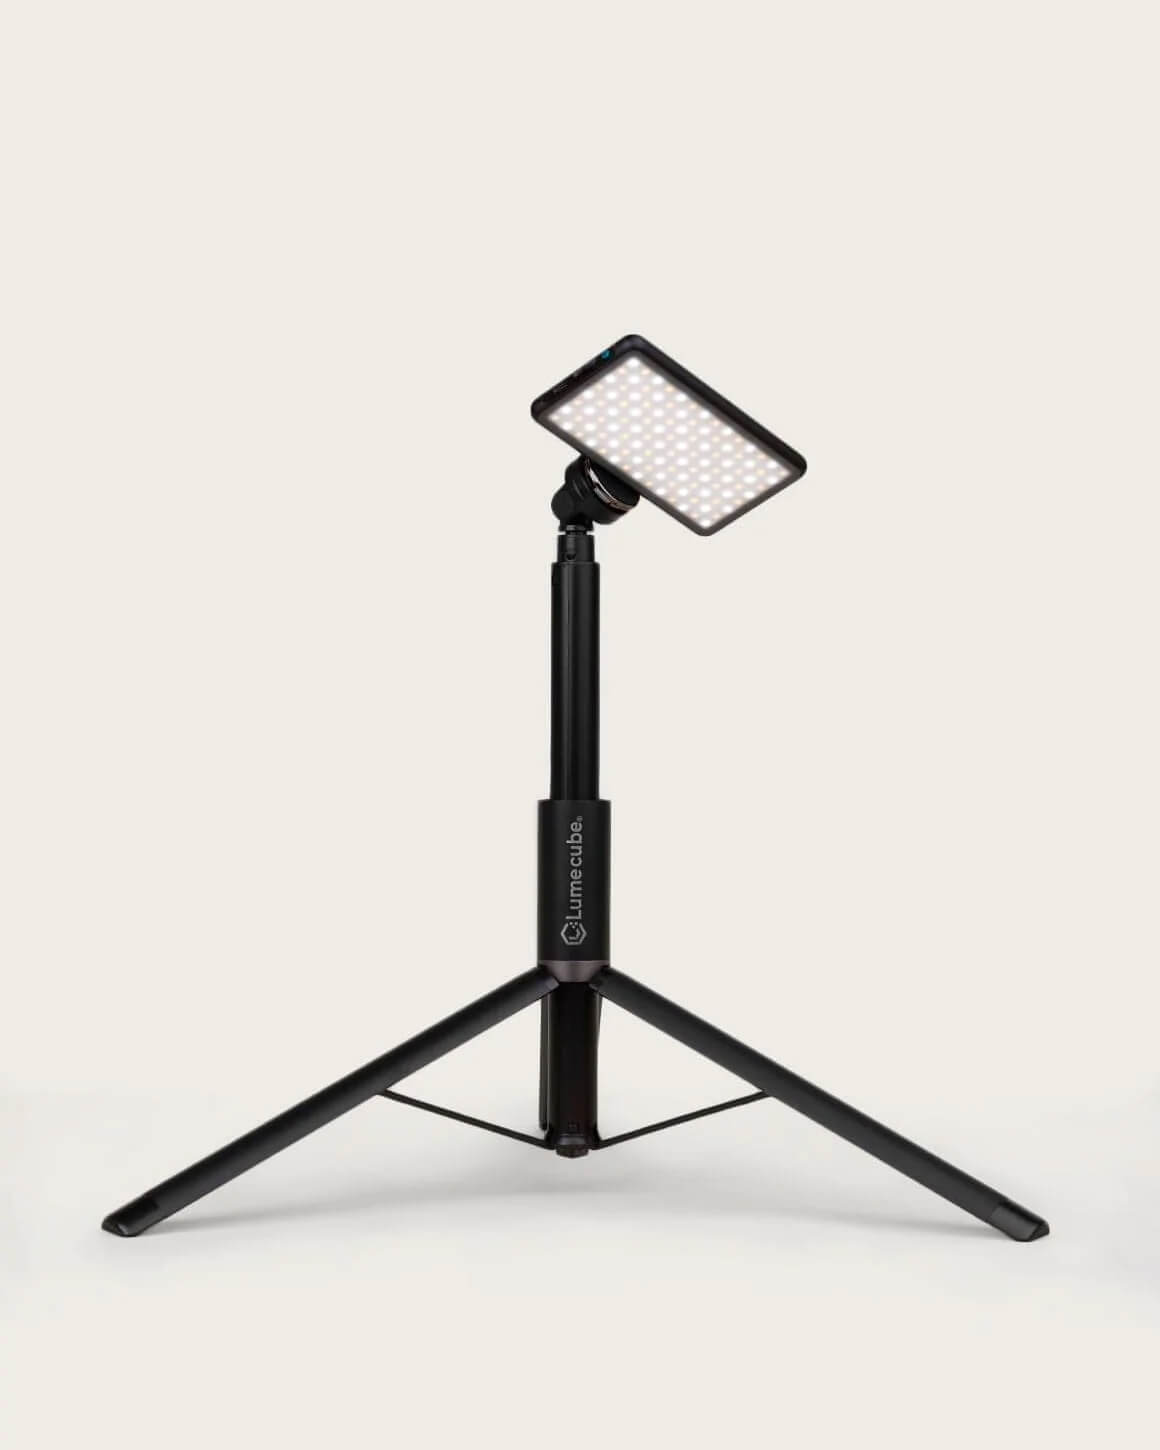 Black metal Lume Cube Adjustable Light Stand in shortest setup with a tilted LED RGB Panel Pro attached.